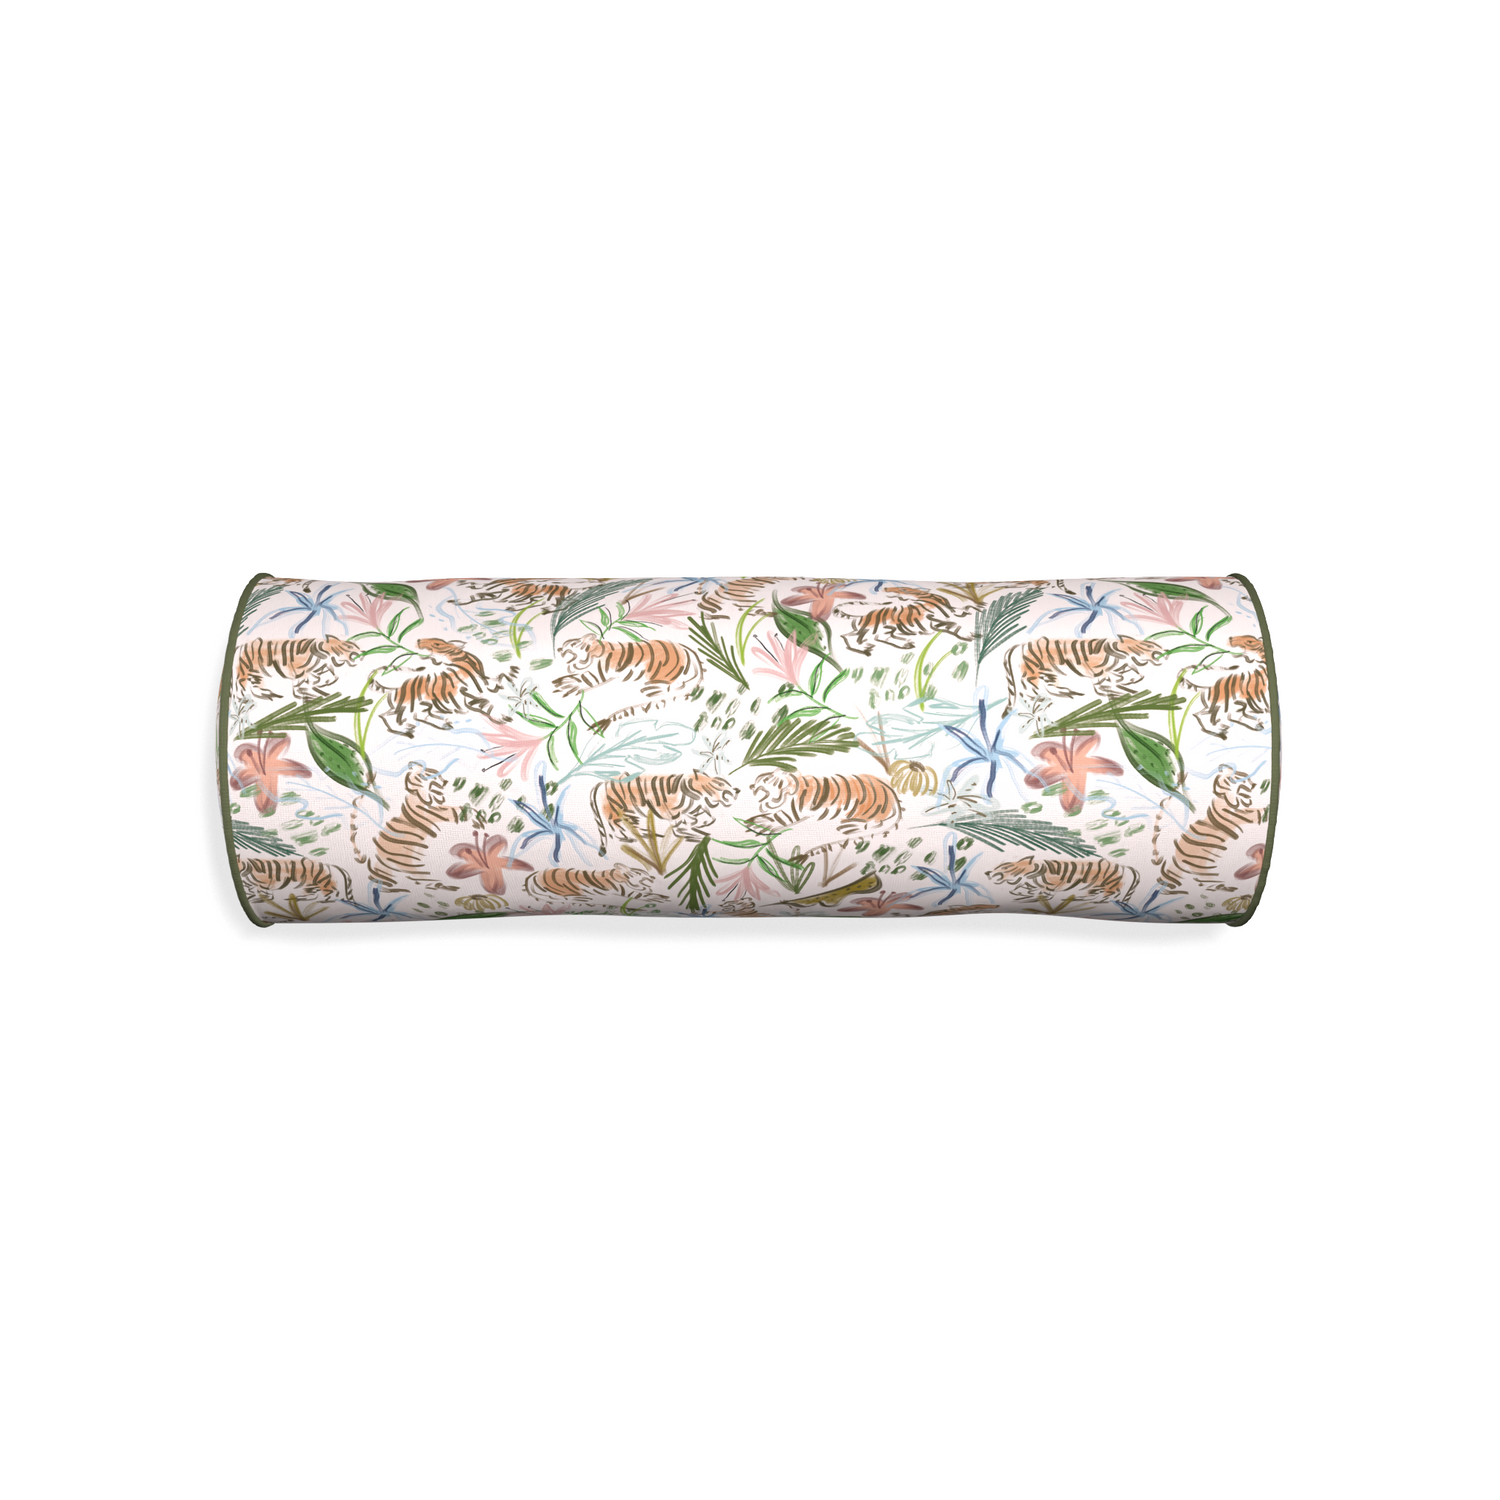 Bolster frida pink custom pink chinoiserie tigerpillow with f piping on white background